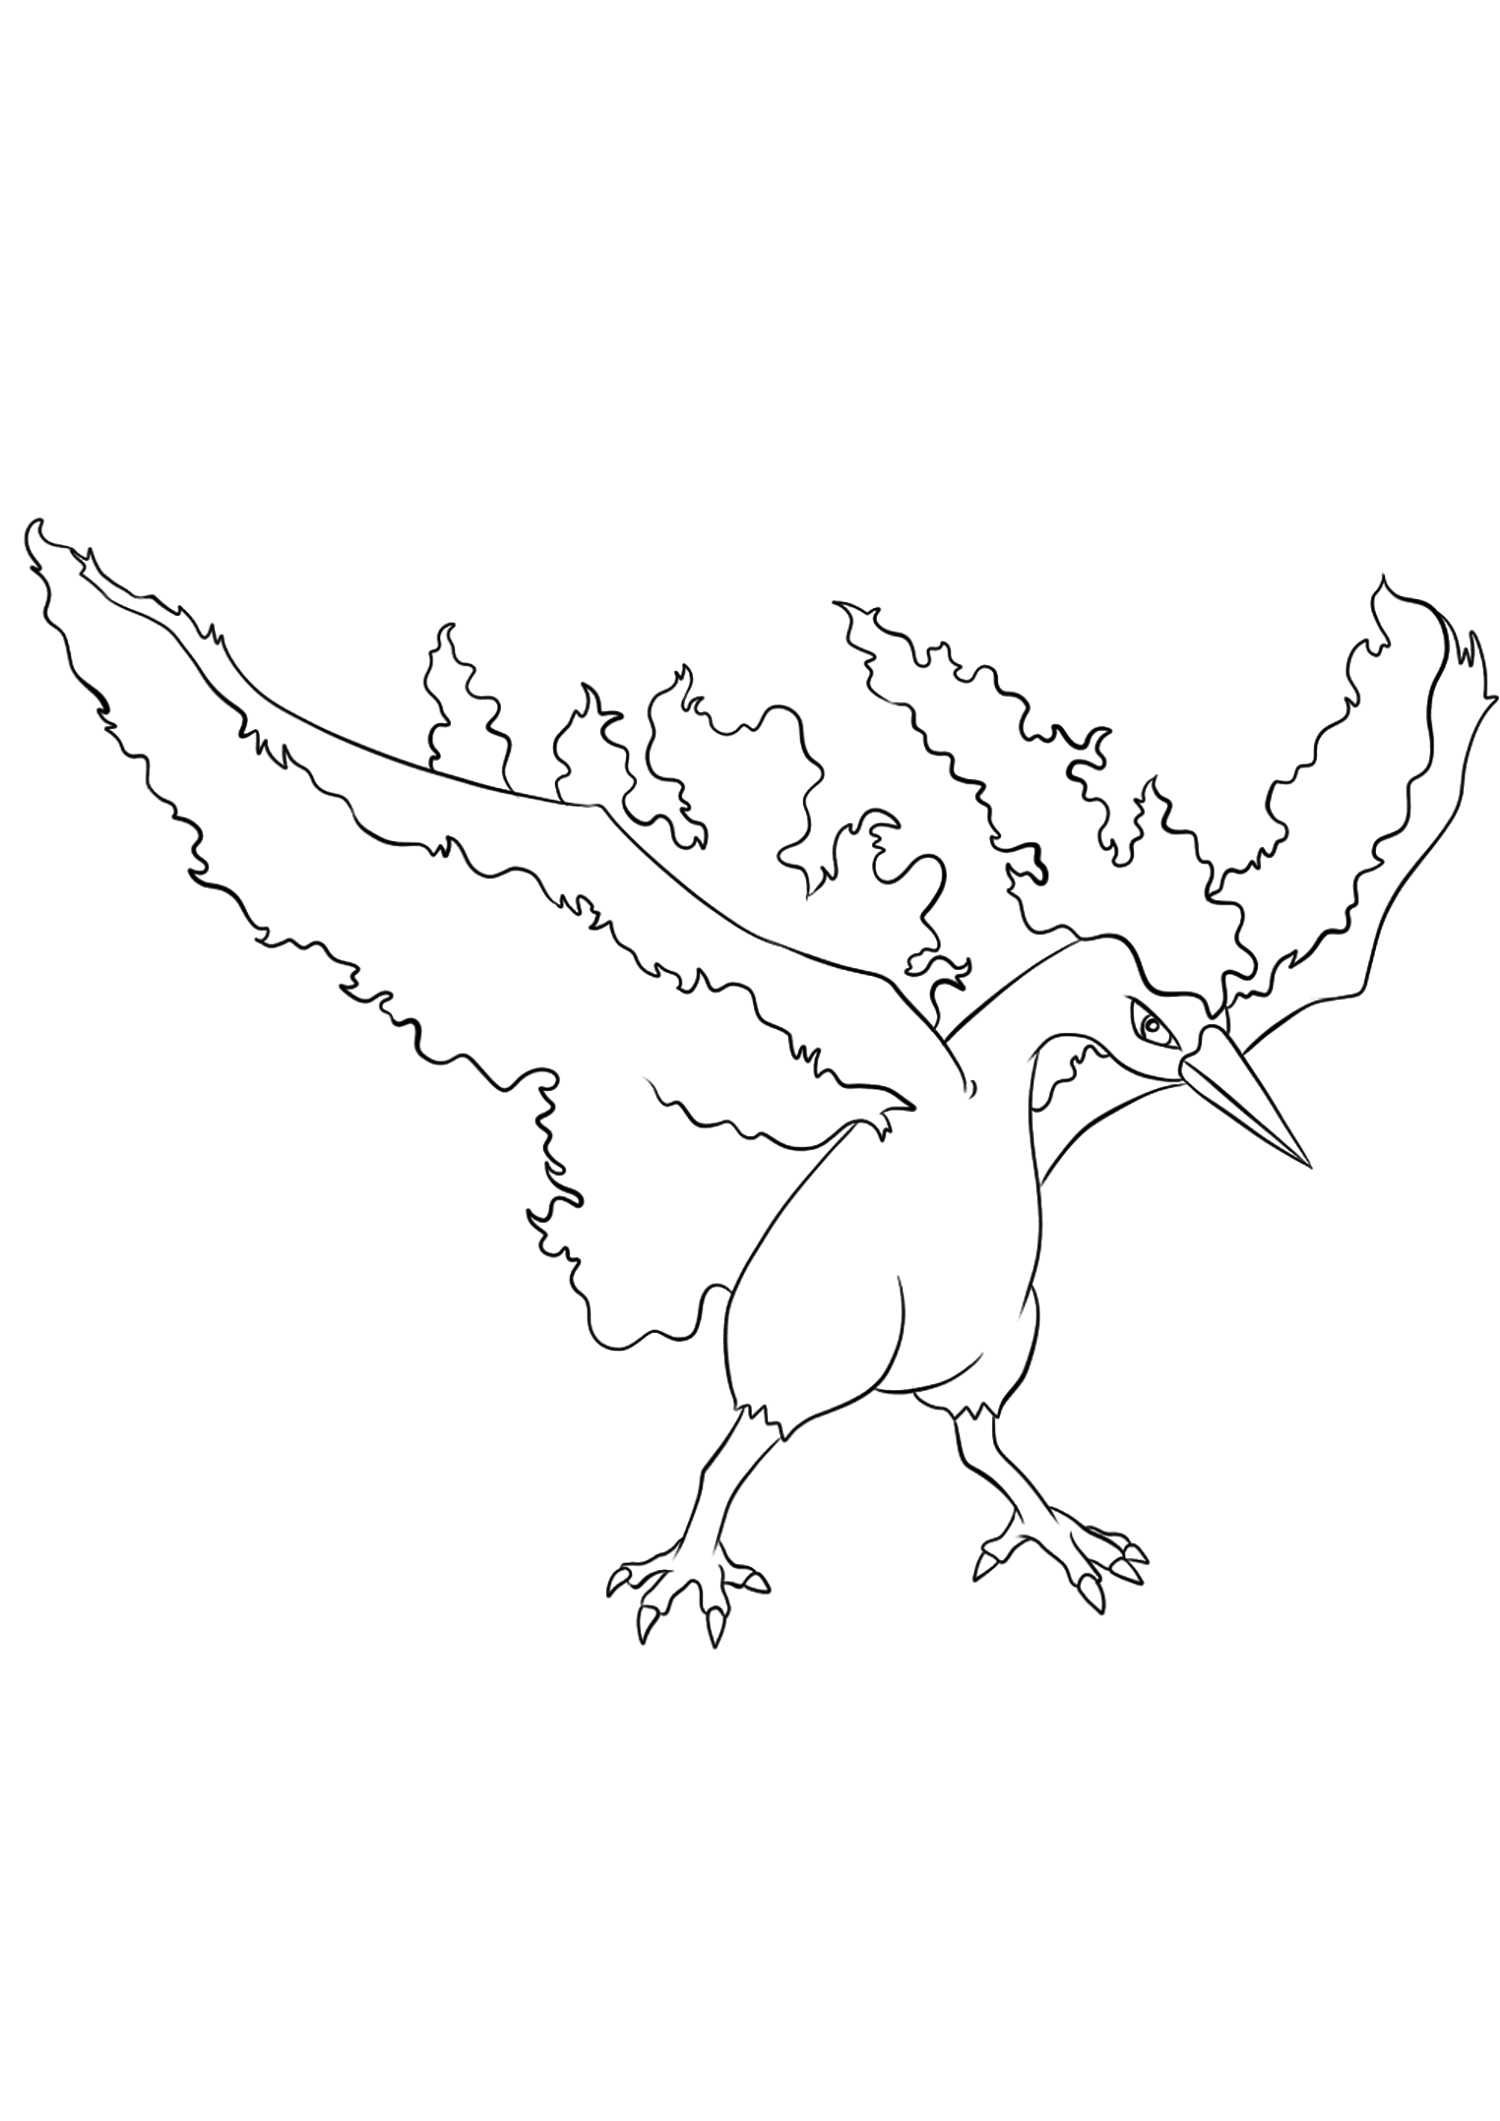 Moltres (No.146). Moltres Coloring page, Generation I Pokemon of type Fire and FlyingOriginal image credit: Pokemon linearts by Lilly Gerbil on Deviantart.Permission:  All rights reserved © Pokemon company and Ken Sugimori.